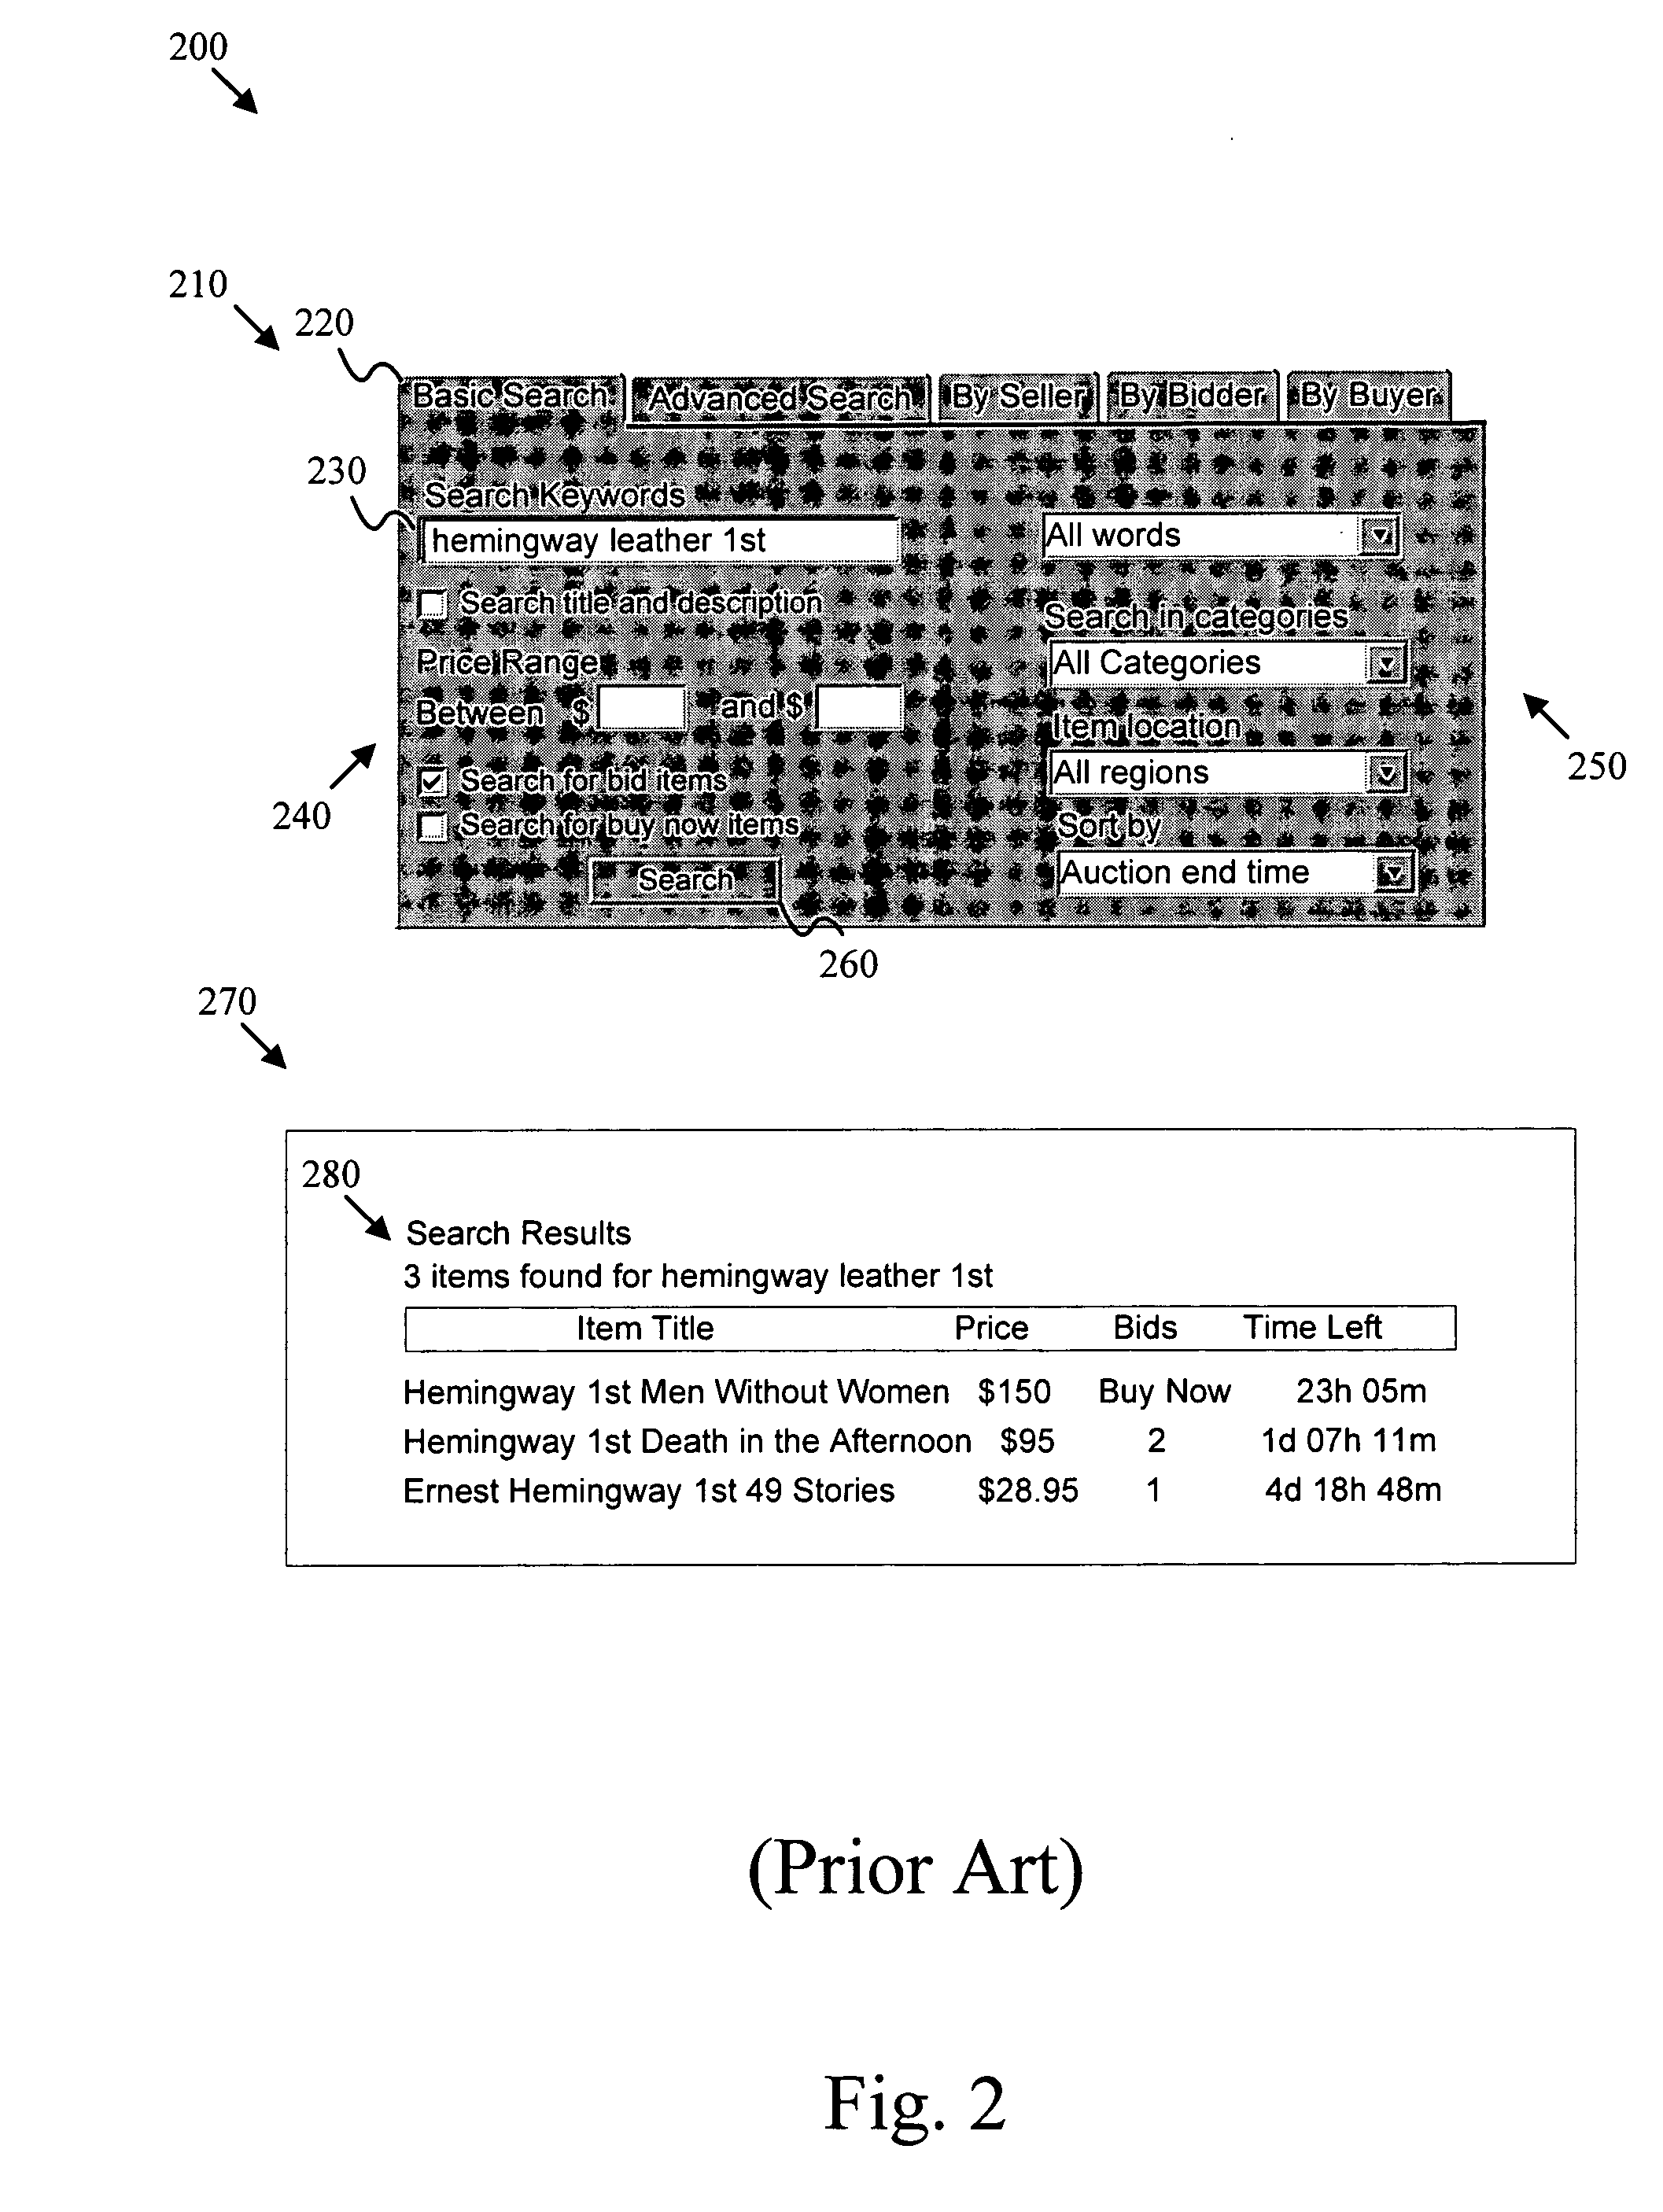 Enhanced online auction method and apparatus